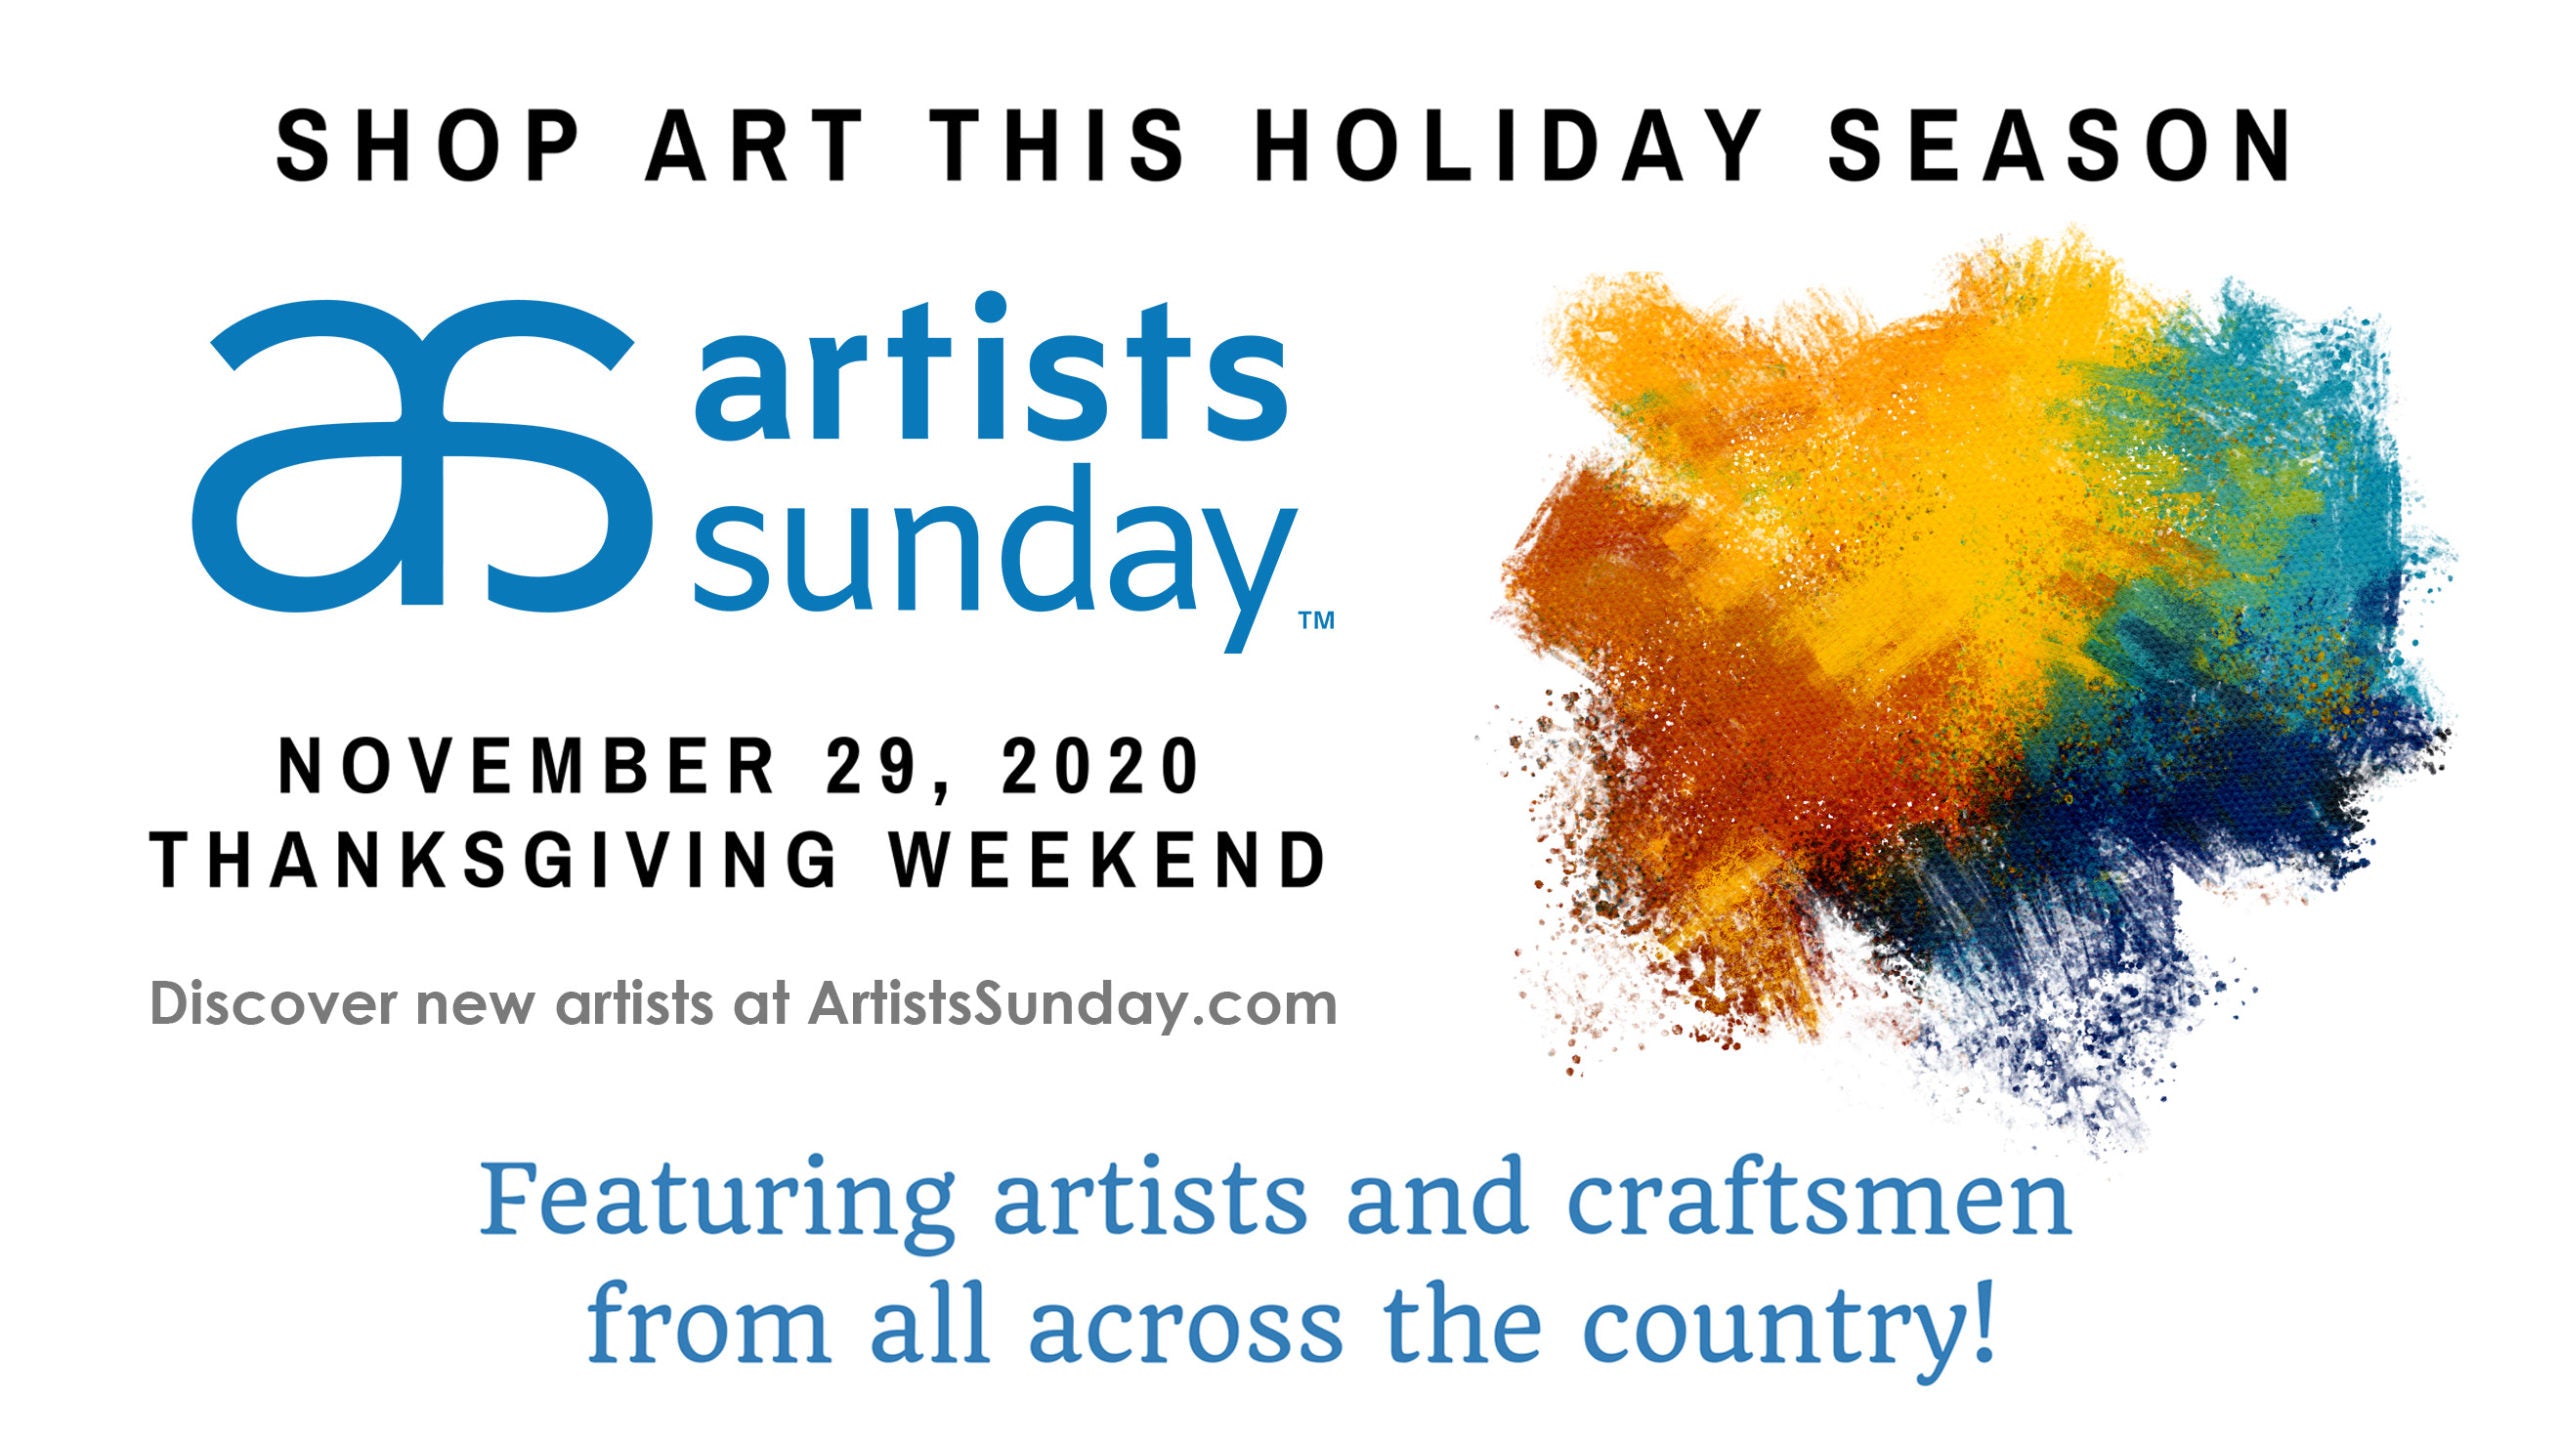 This Sunday November 29th is Artists Sunday!